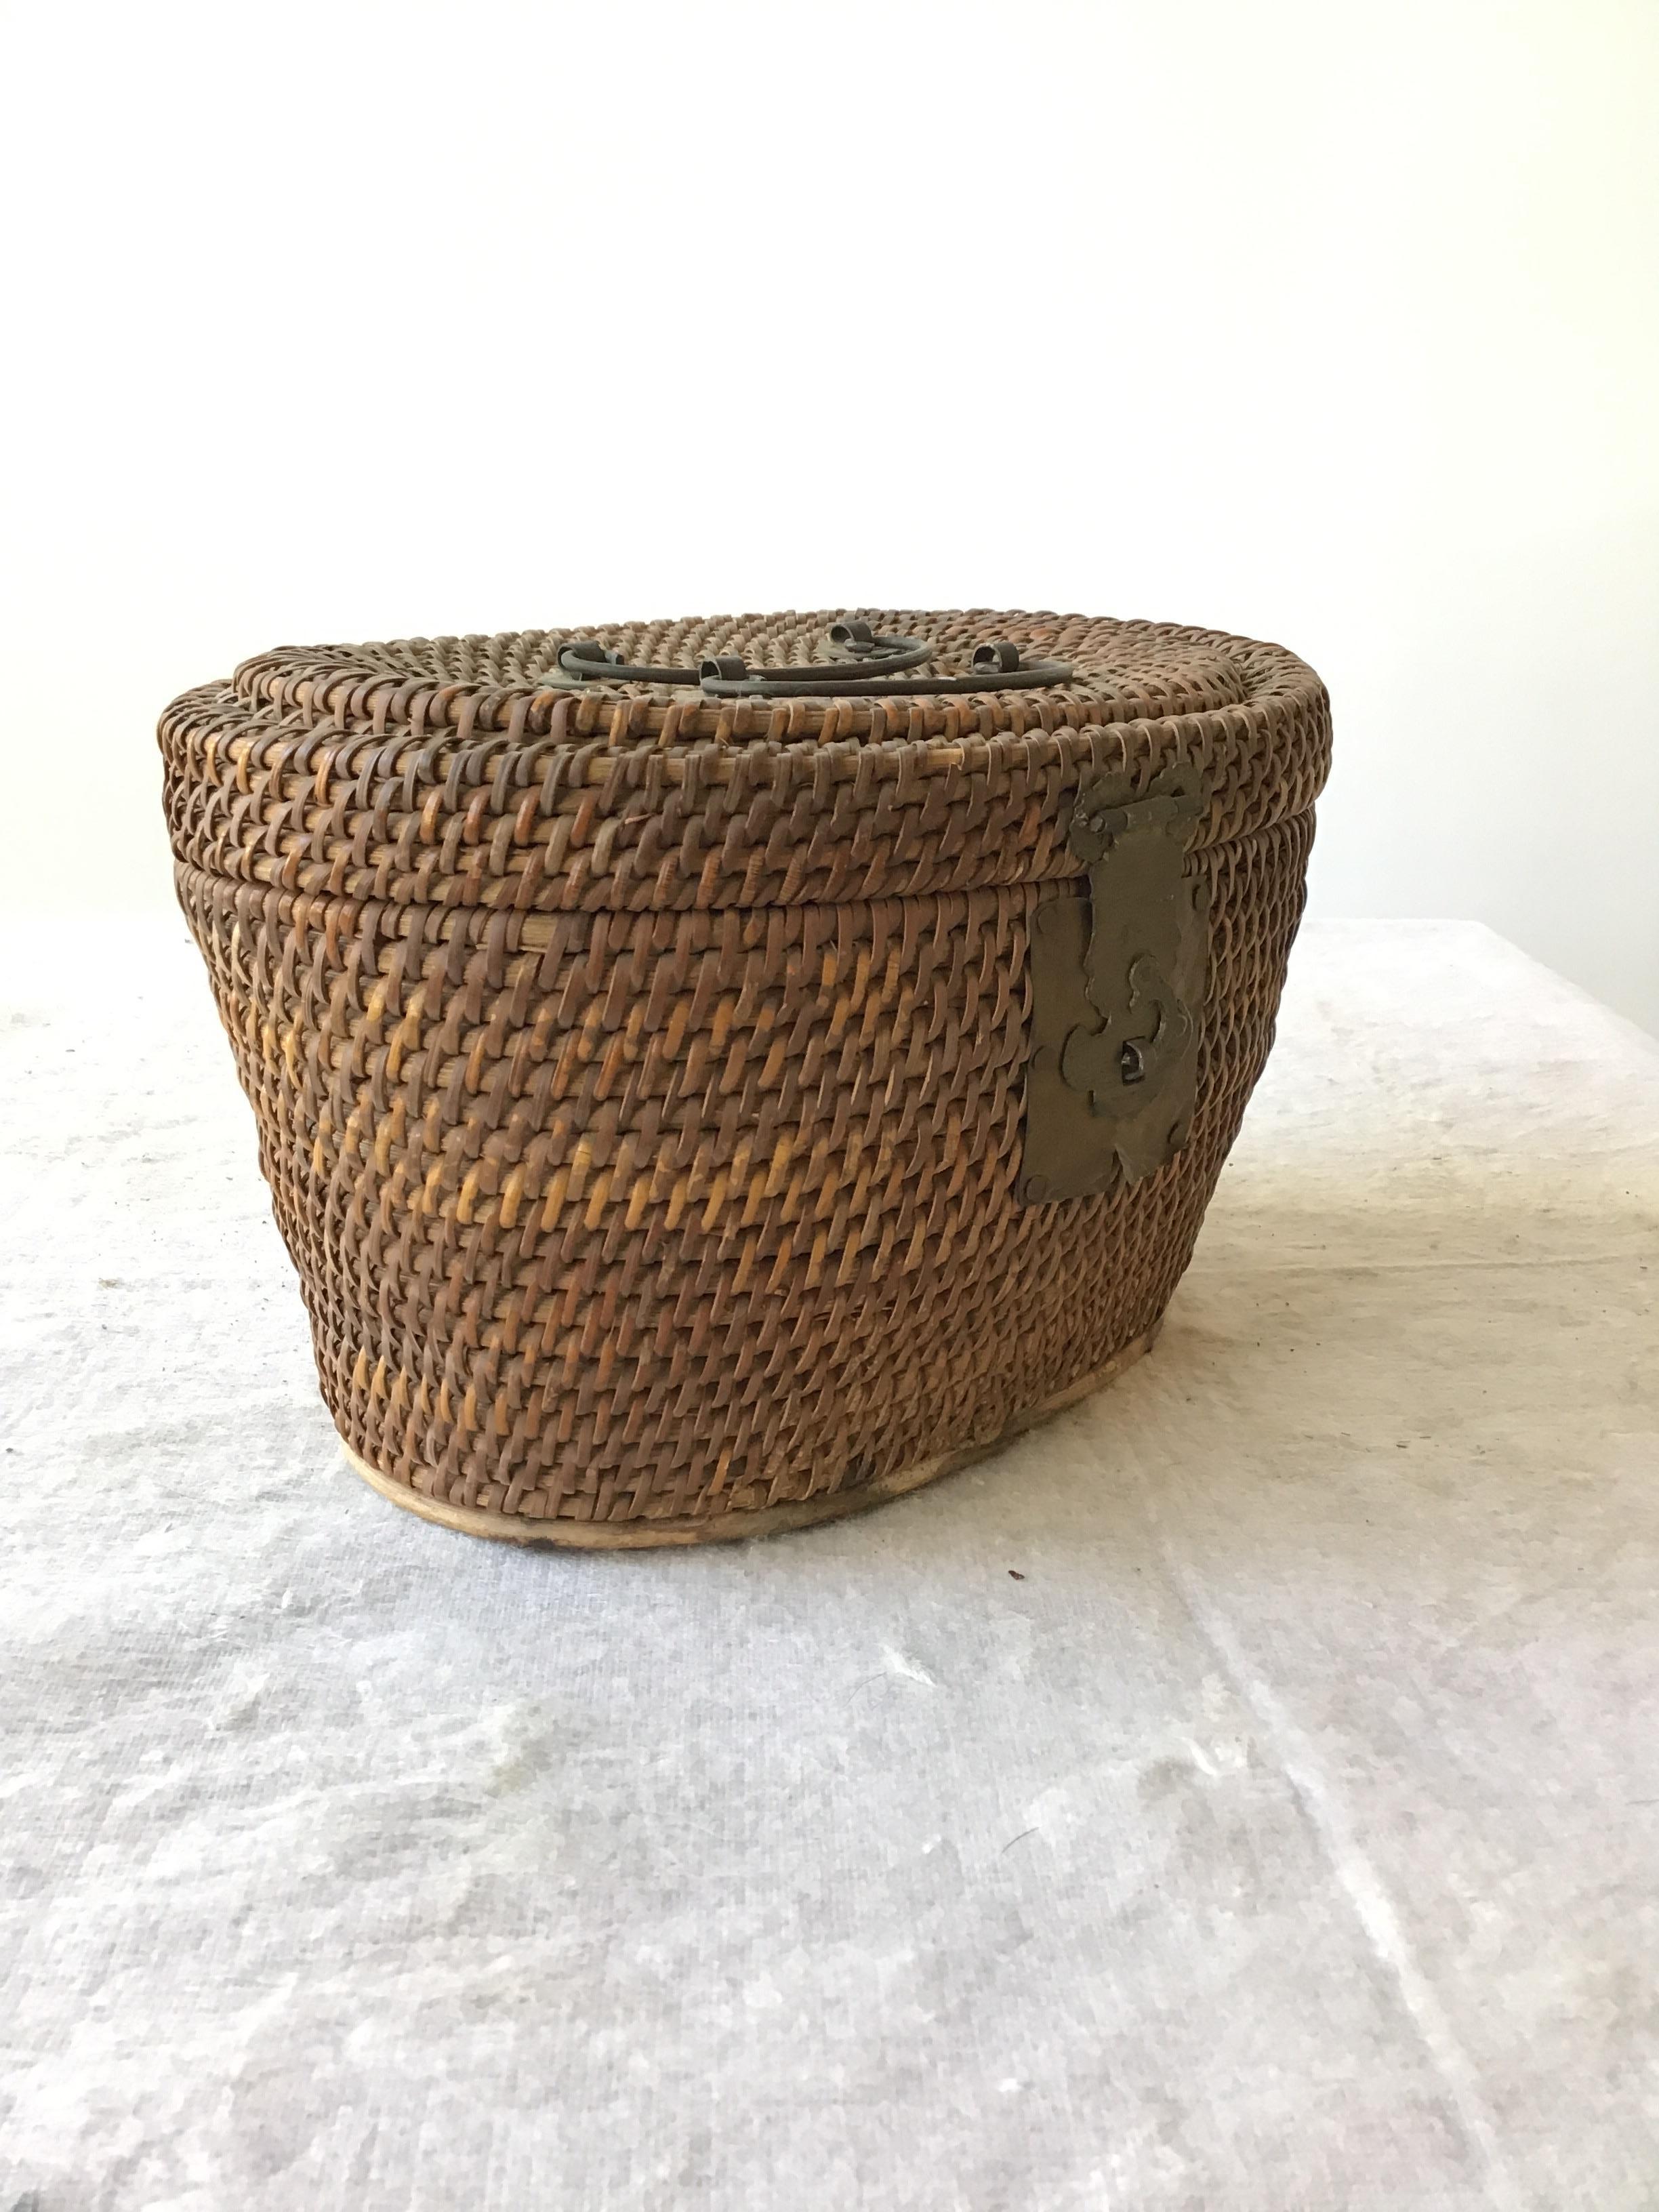 1920s Chinese wicker and brass lunch basket.